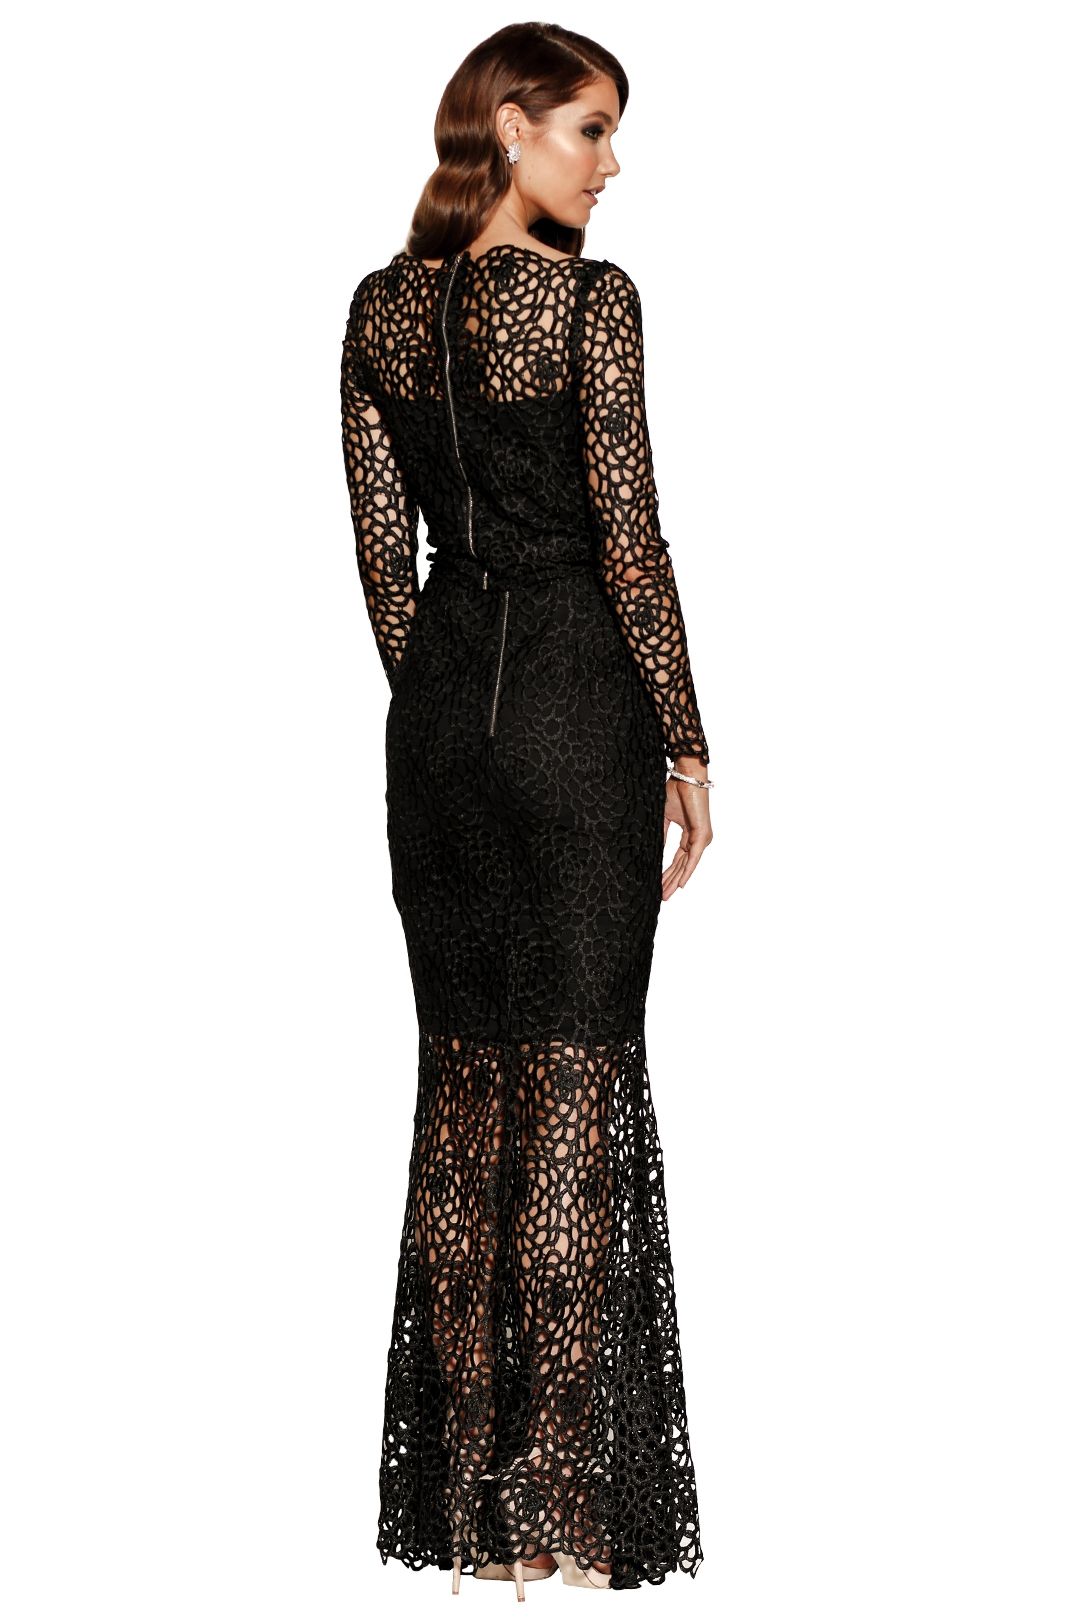 Grace and Hart - Scandal Gown - Black - Back 